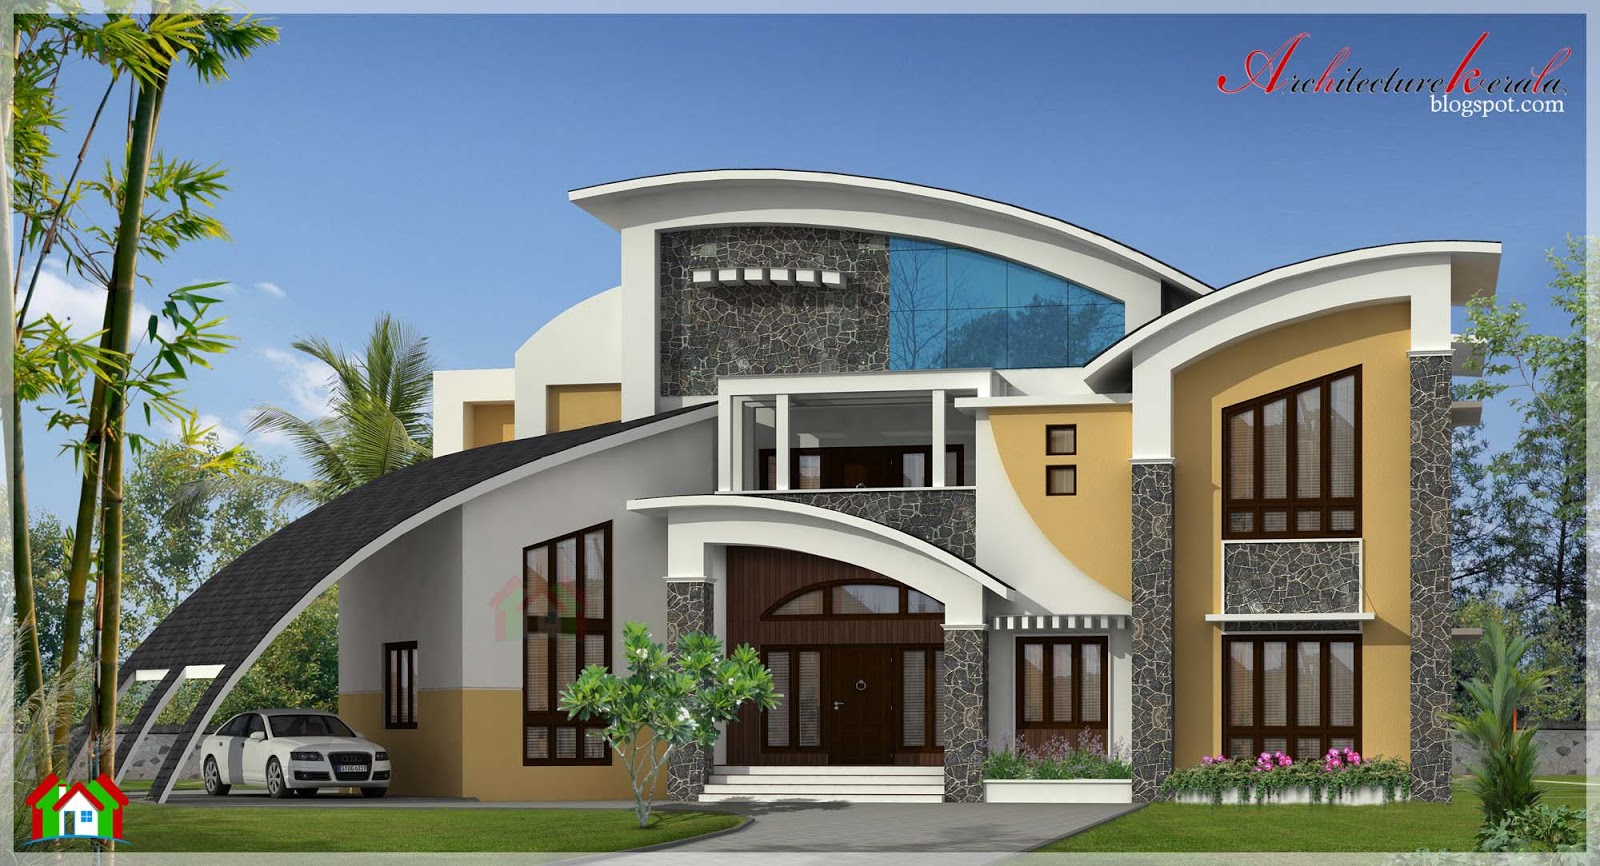 5800 SQUARE FEET CONTEMPORARY  STYLE HOUSE  ELEVATION  